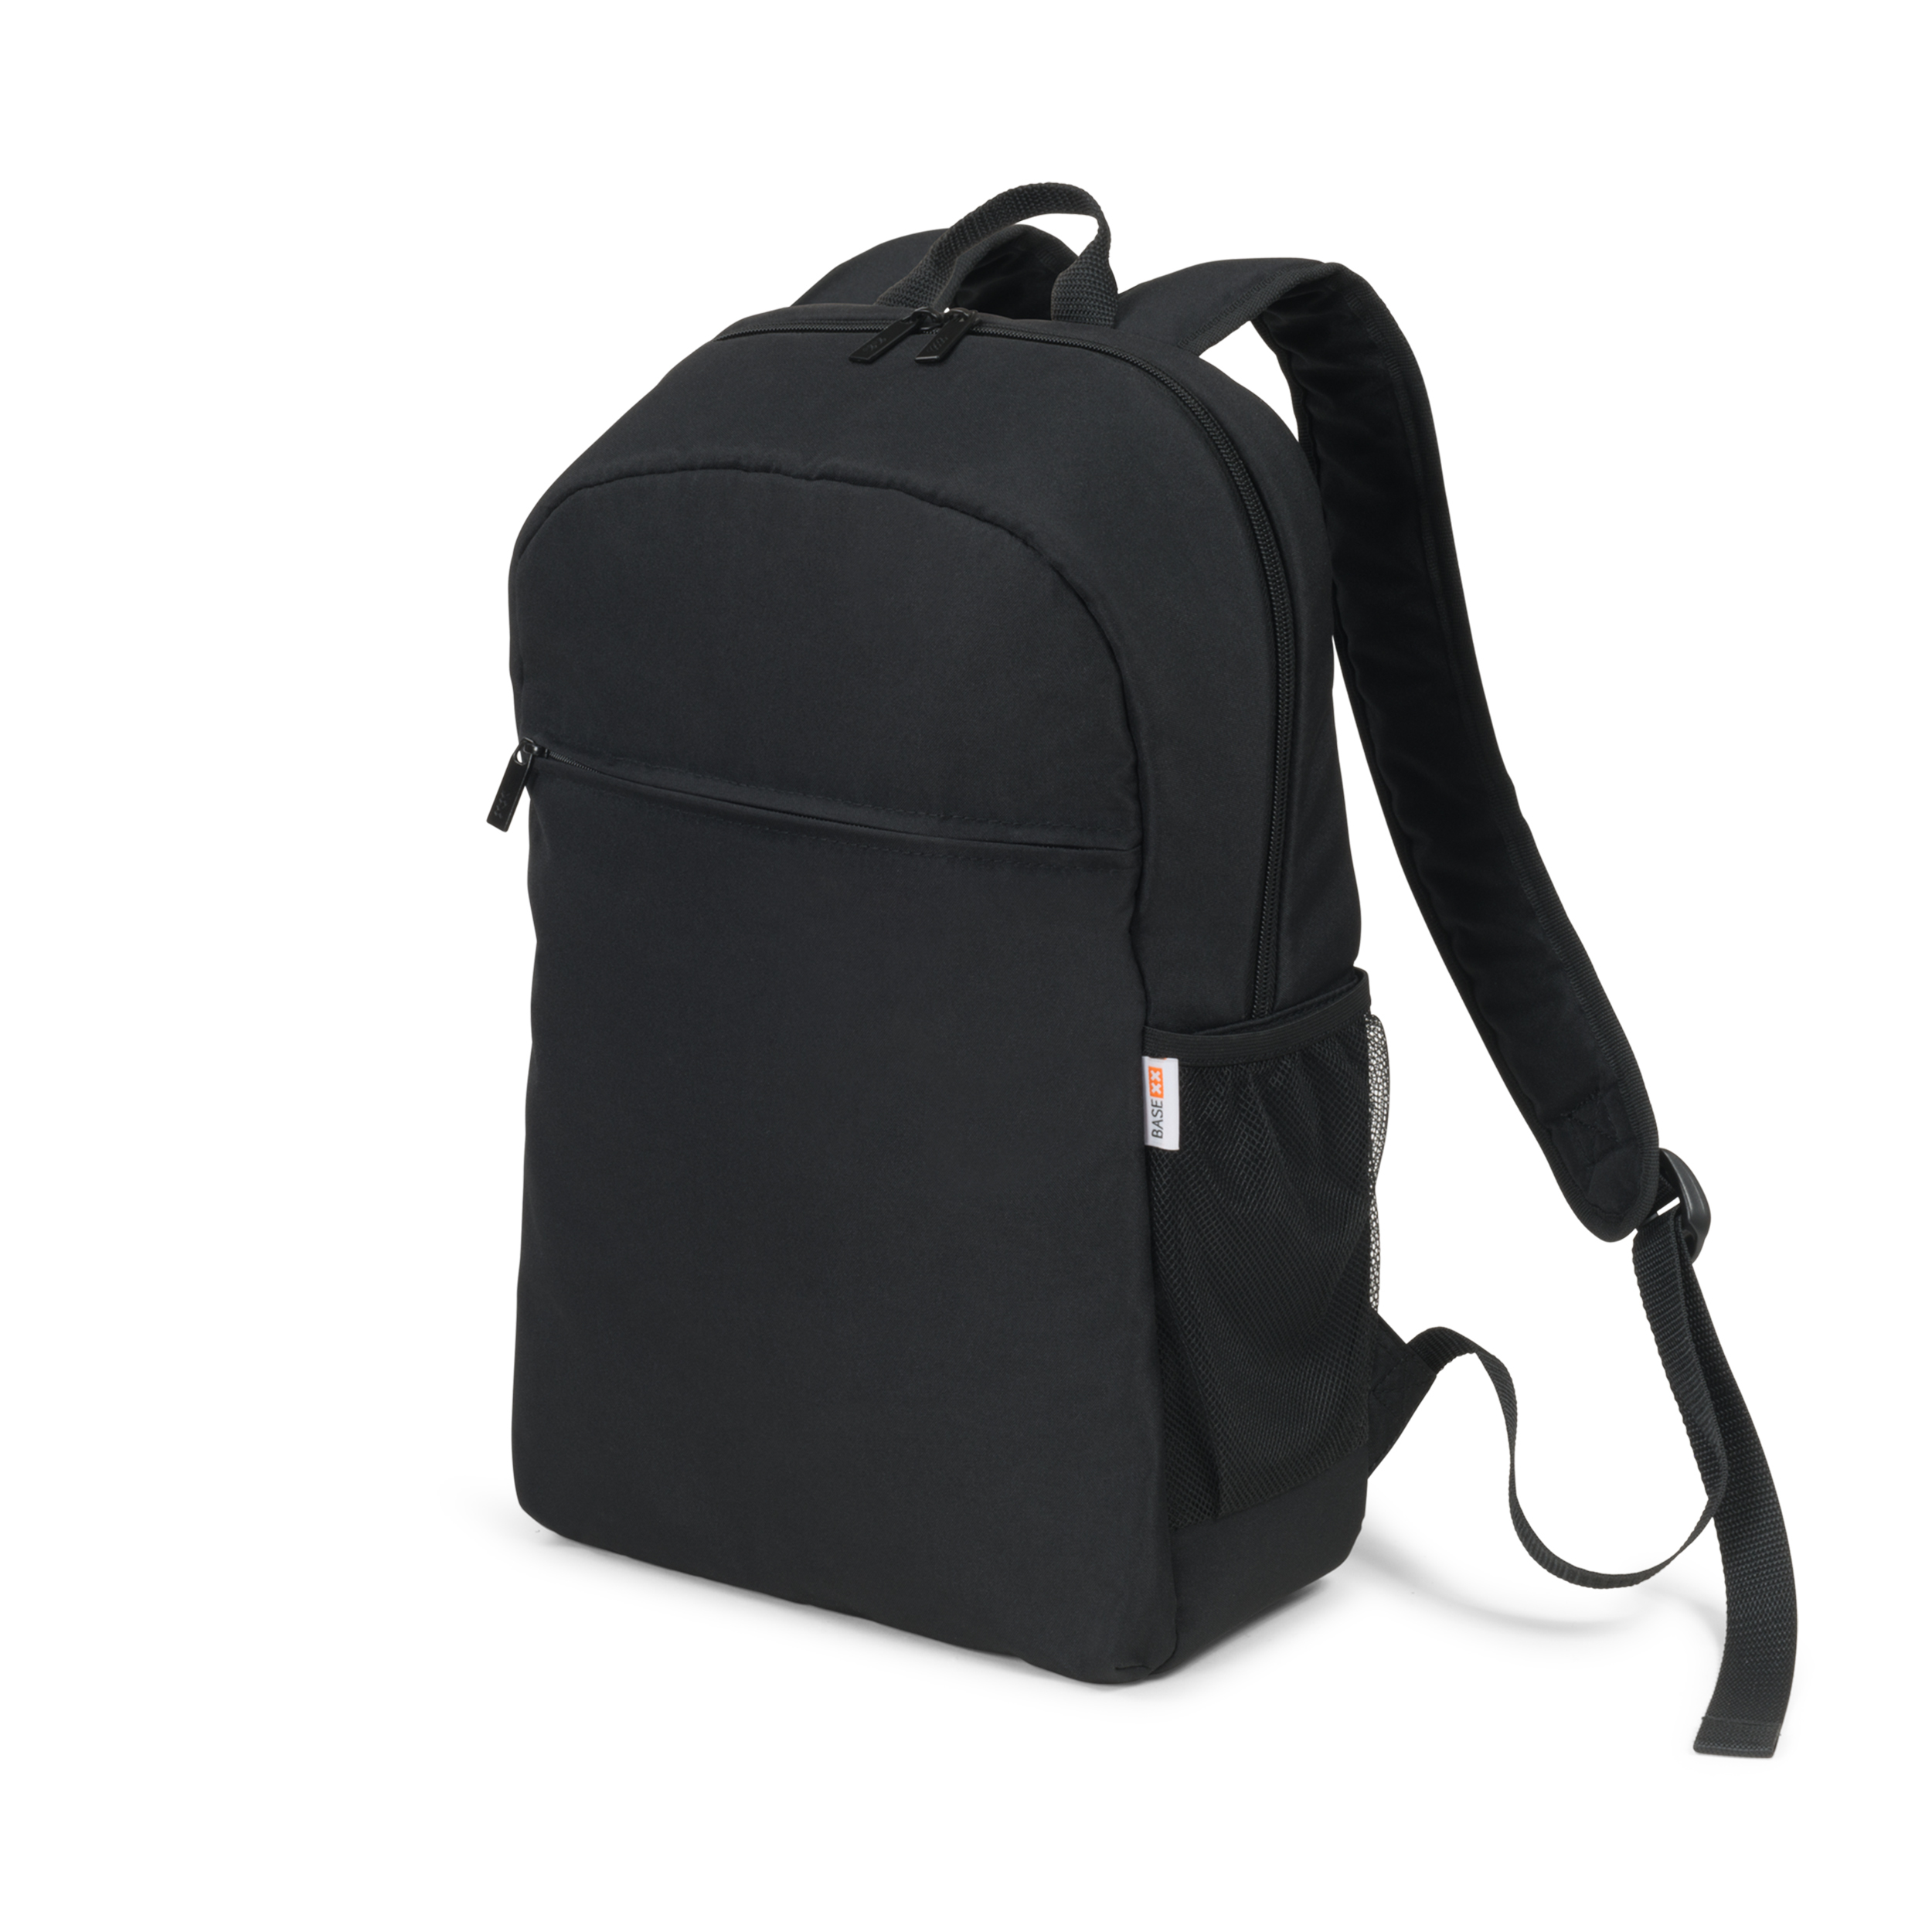 Dicota - Consignment             Base Xx Laptop Backpack             13-15.6in Black                     D31792